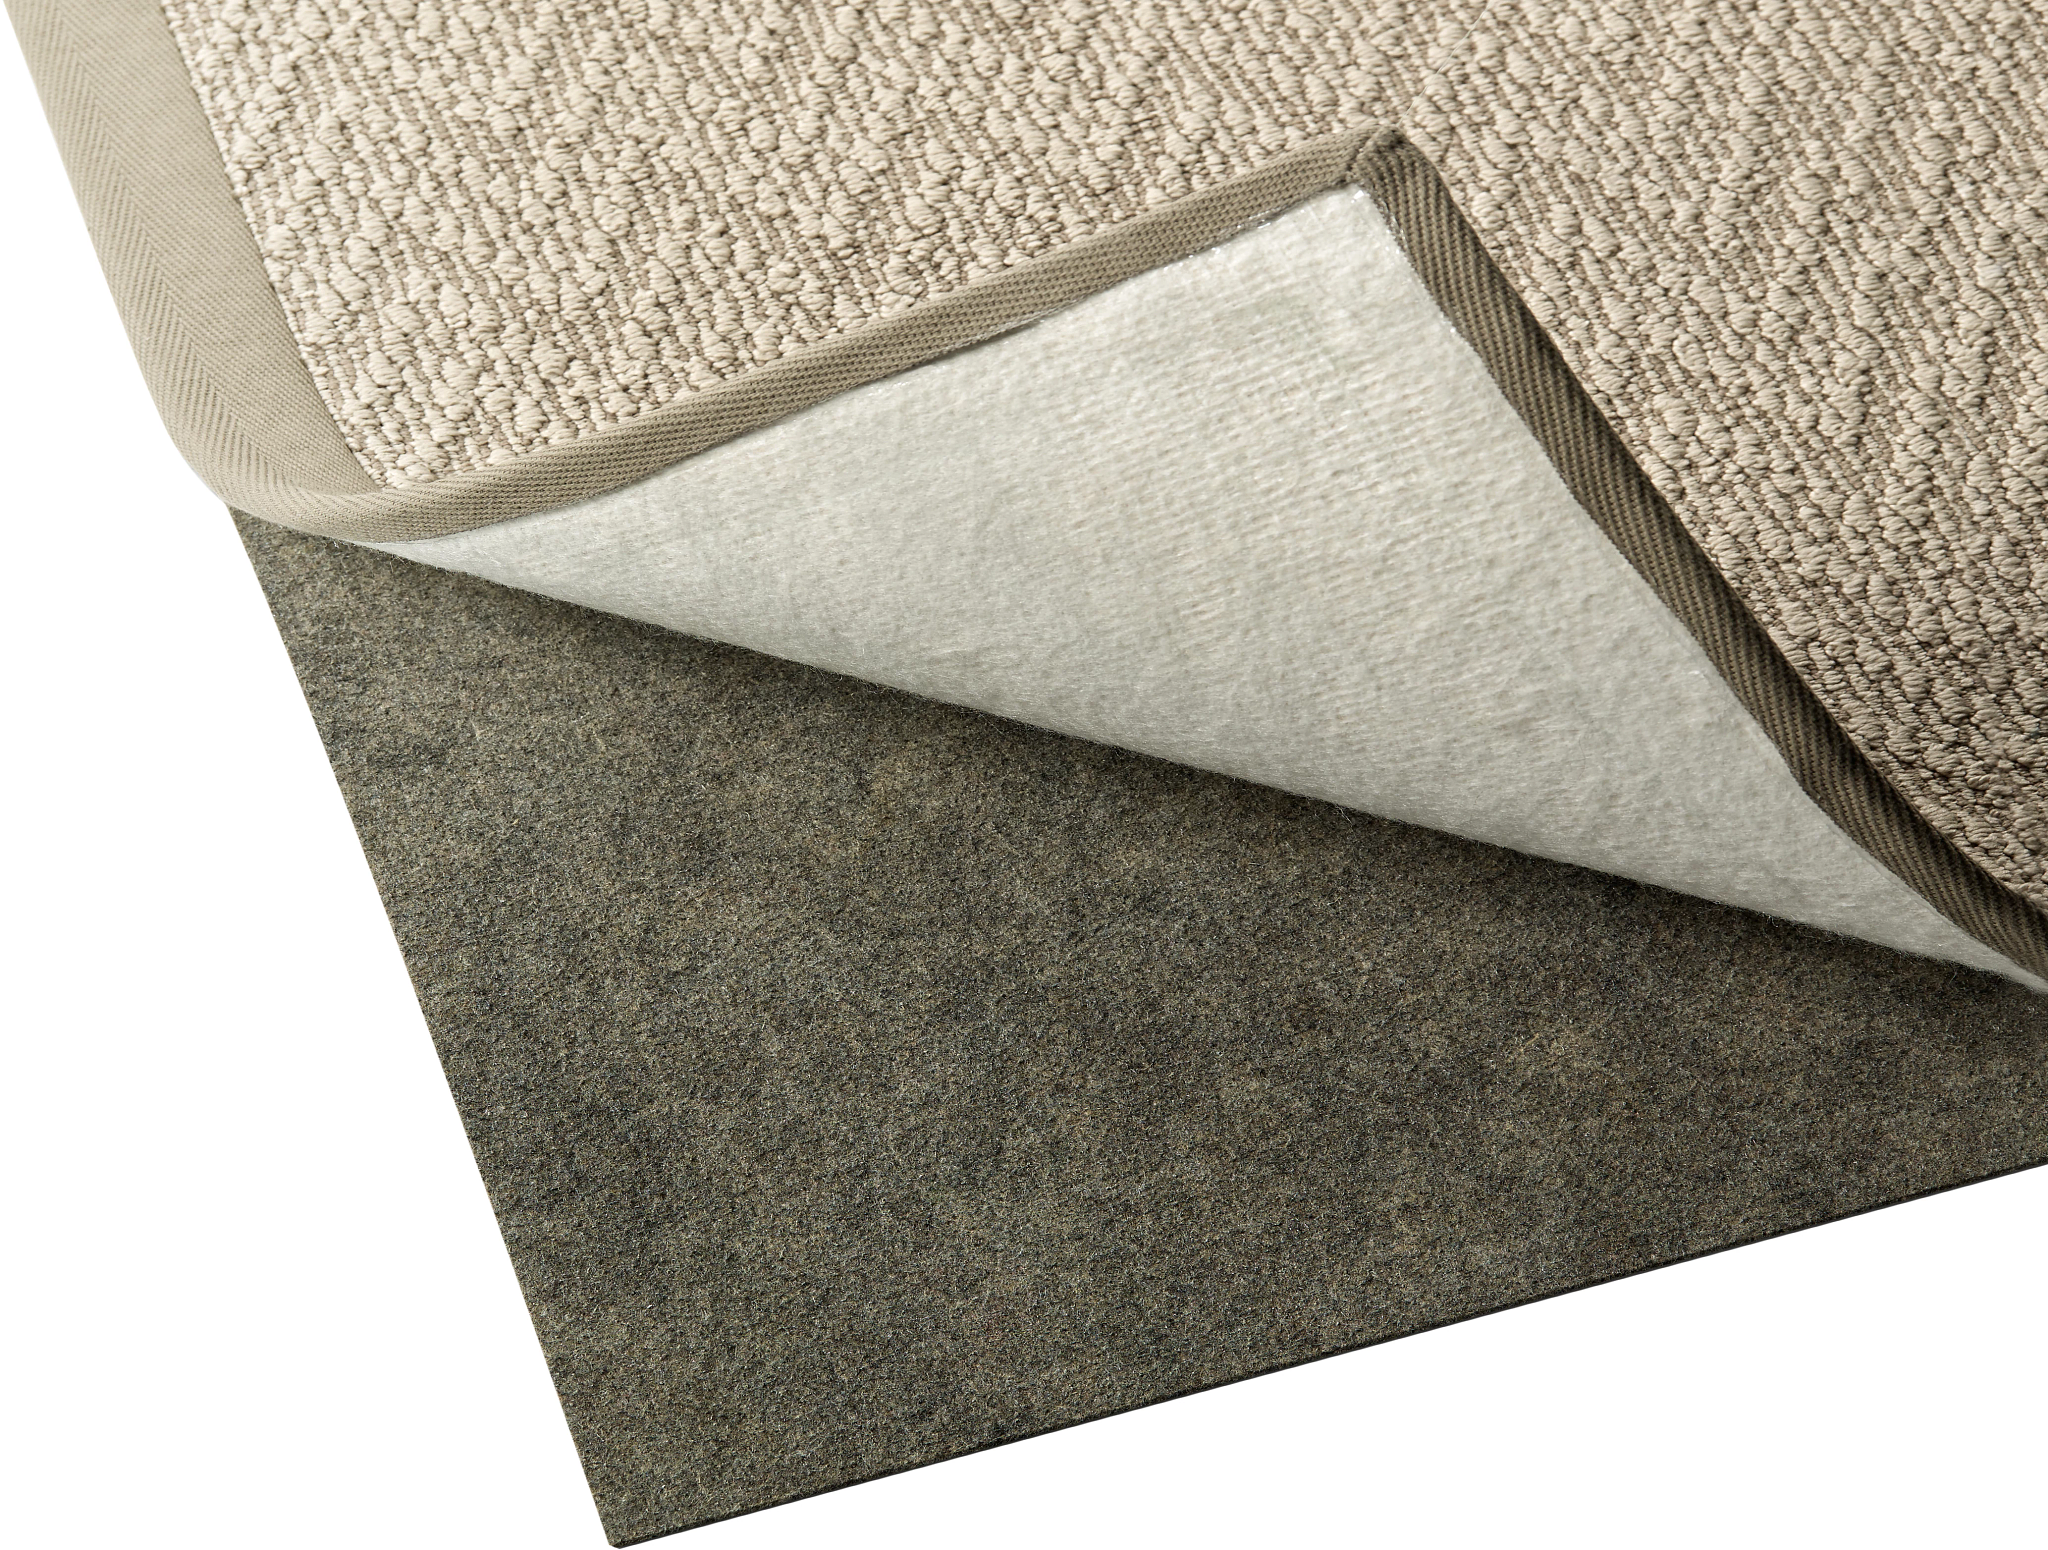 image of carpet pulled back to show rug pad